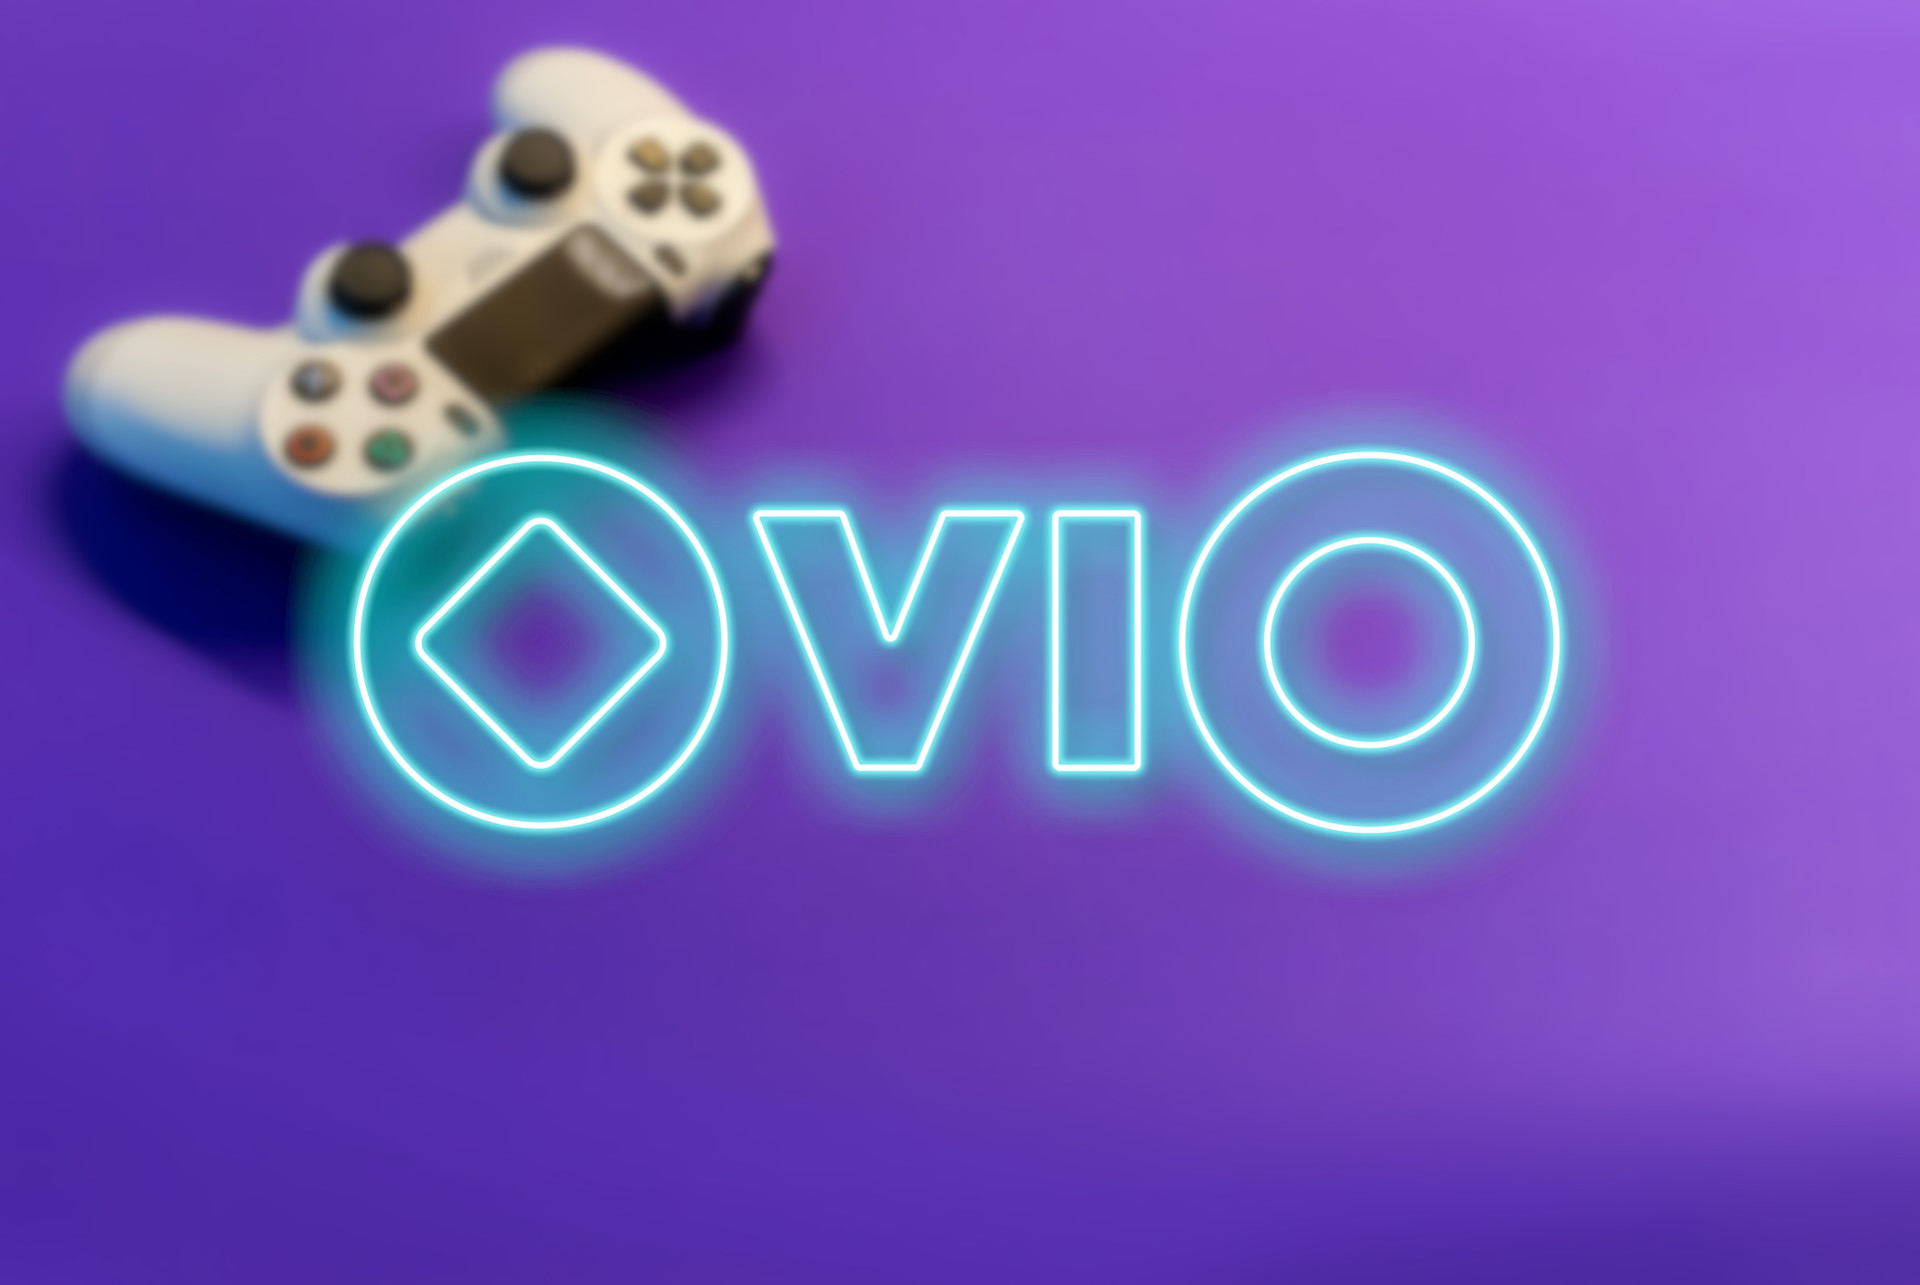 OviO, a Smart Contract Platform Bridging Liquidity Between Web2 Games and Web3, Launches Android App